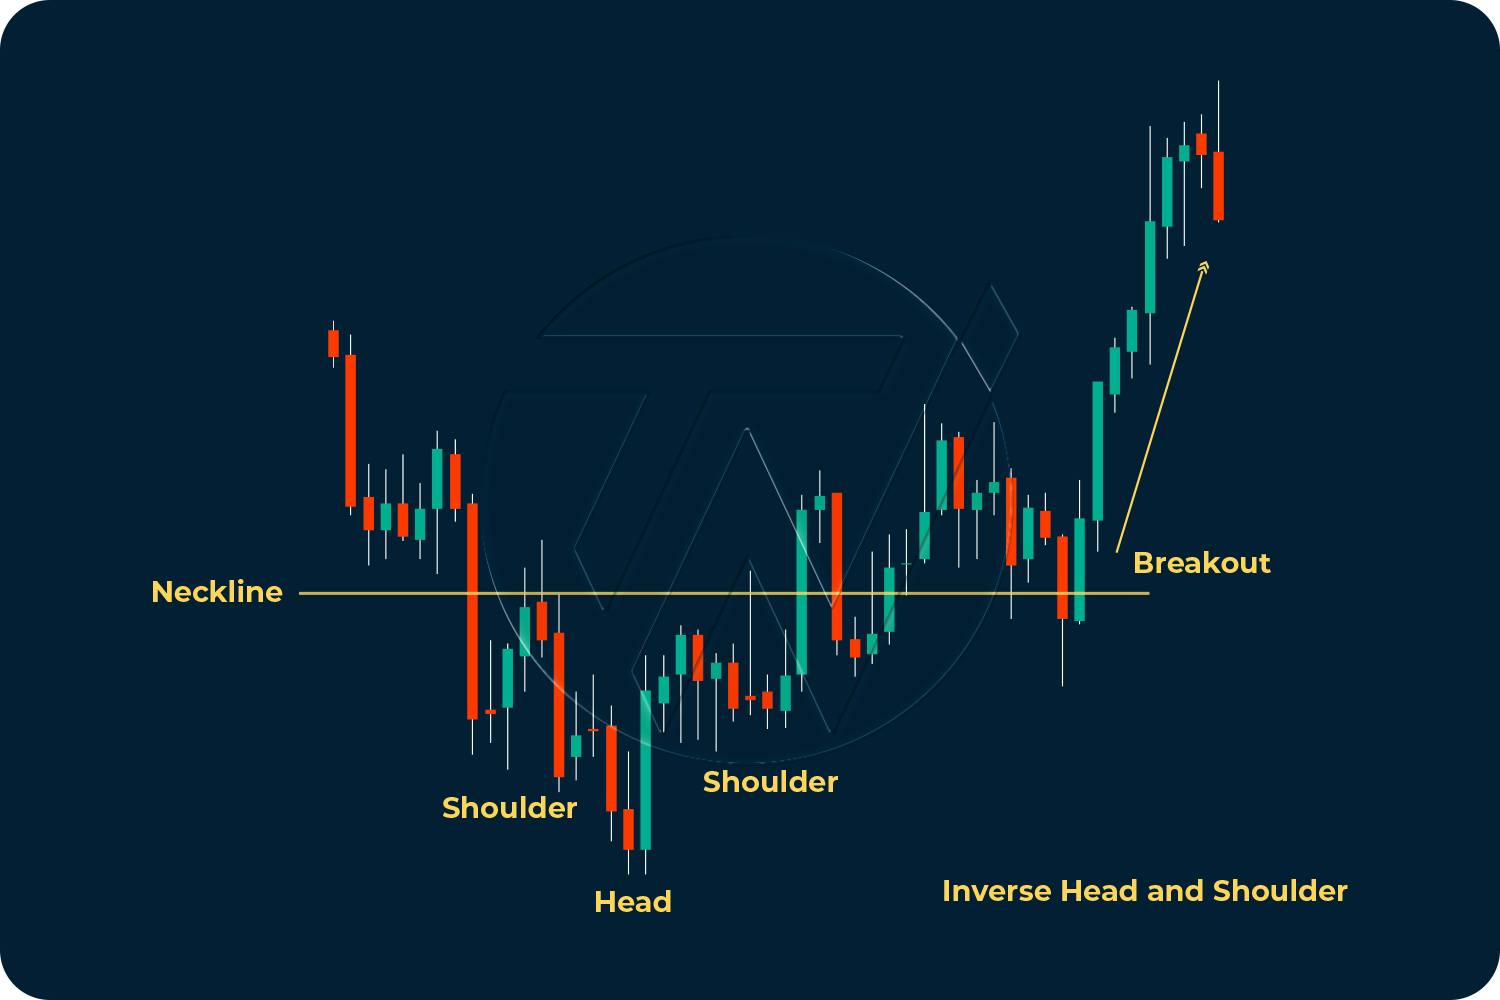 Candlestick chart patterns illustrating inverse head and shoulder